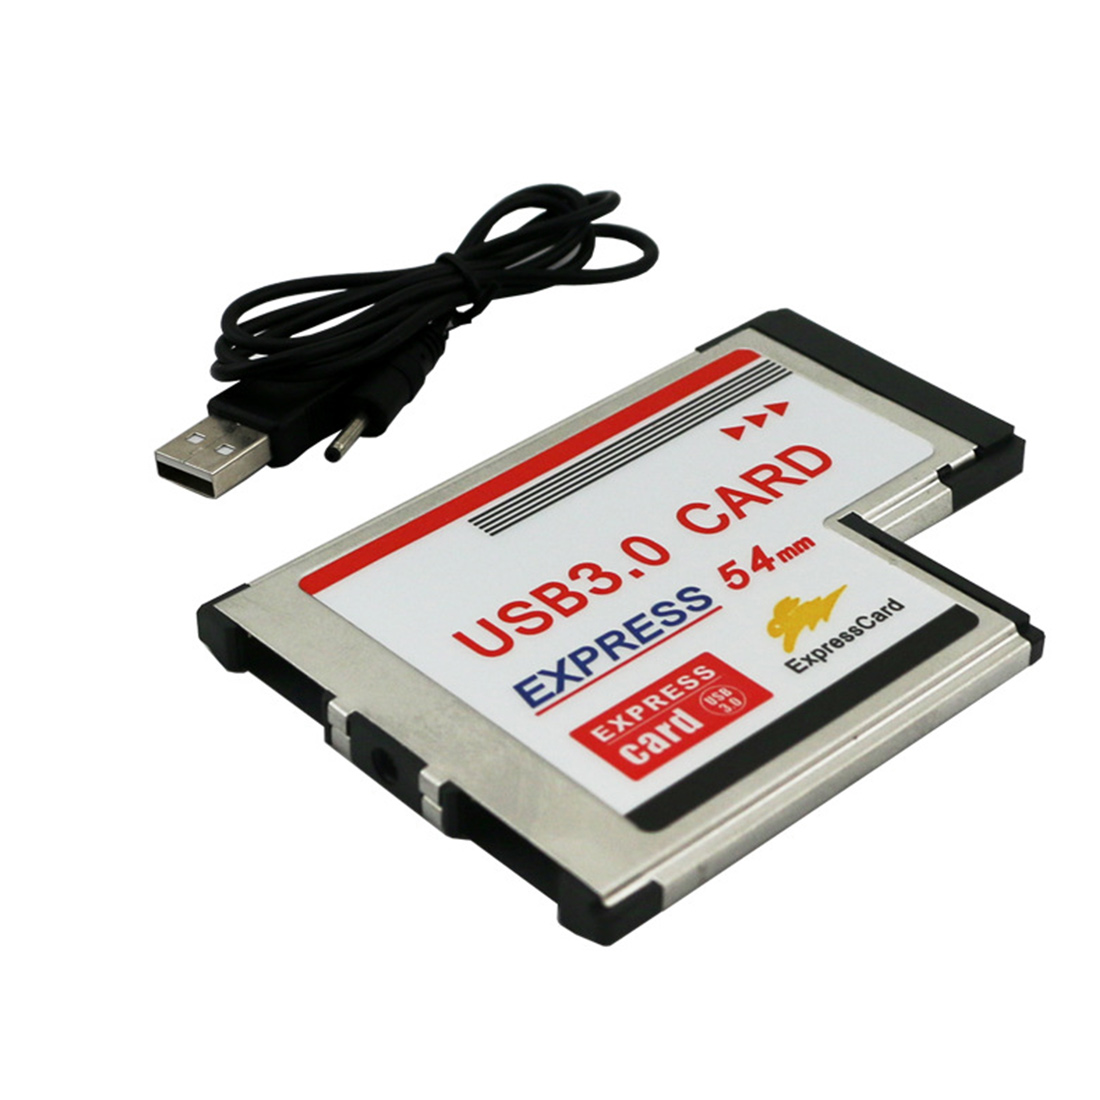 usb 3 card for laptop